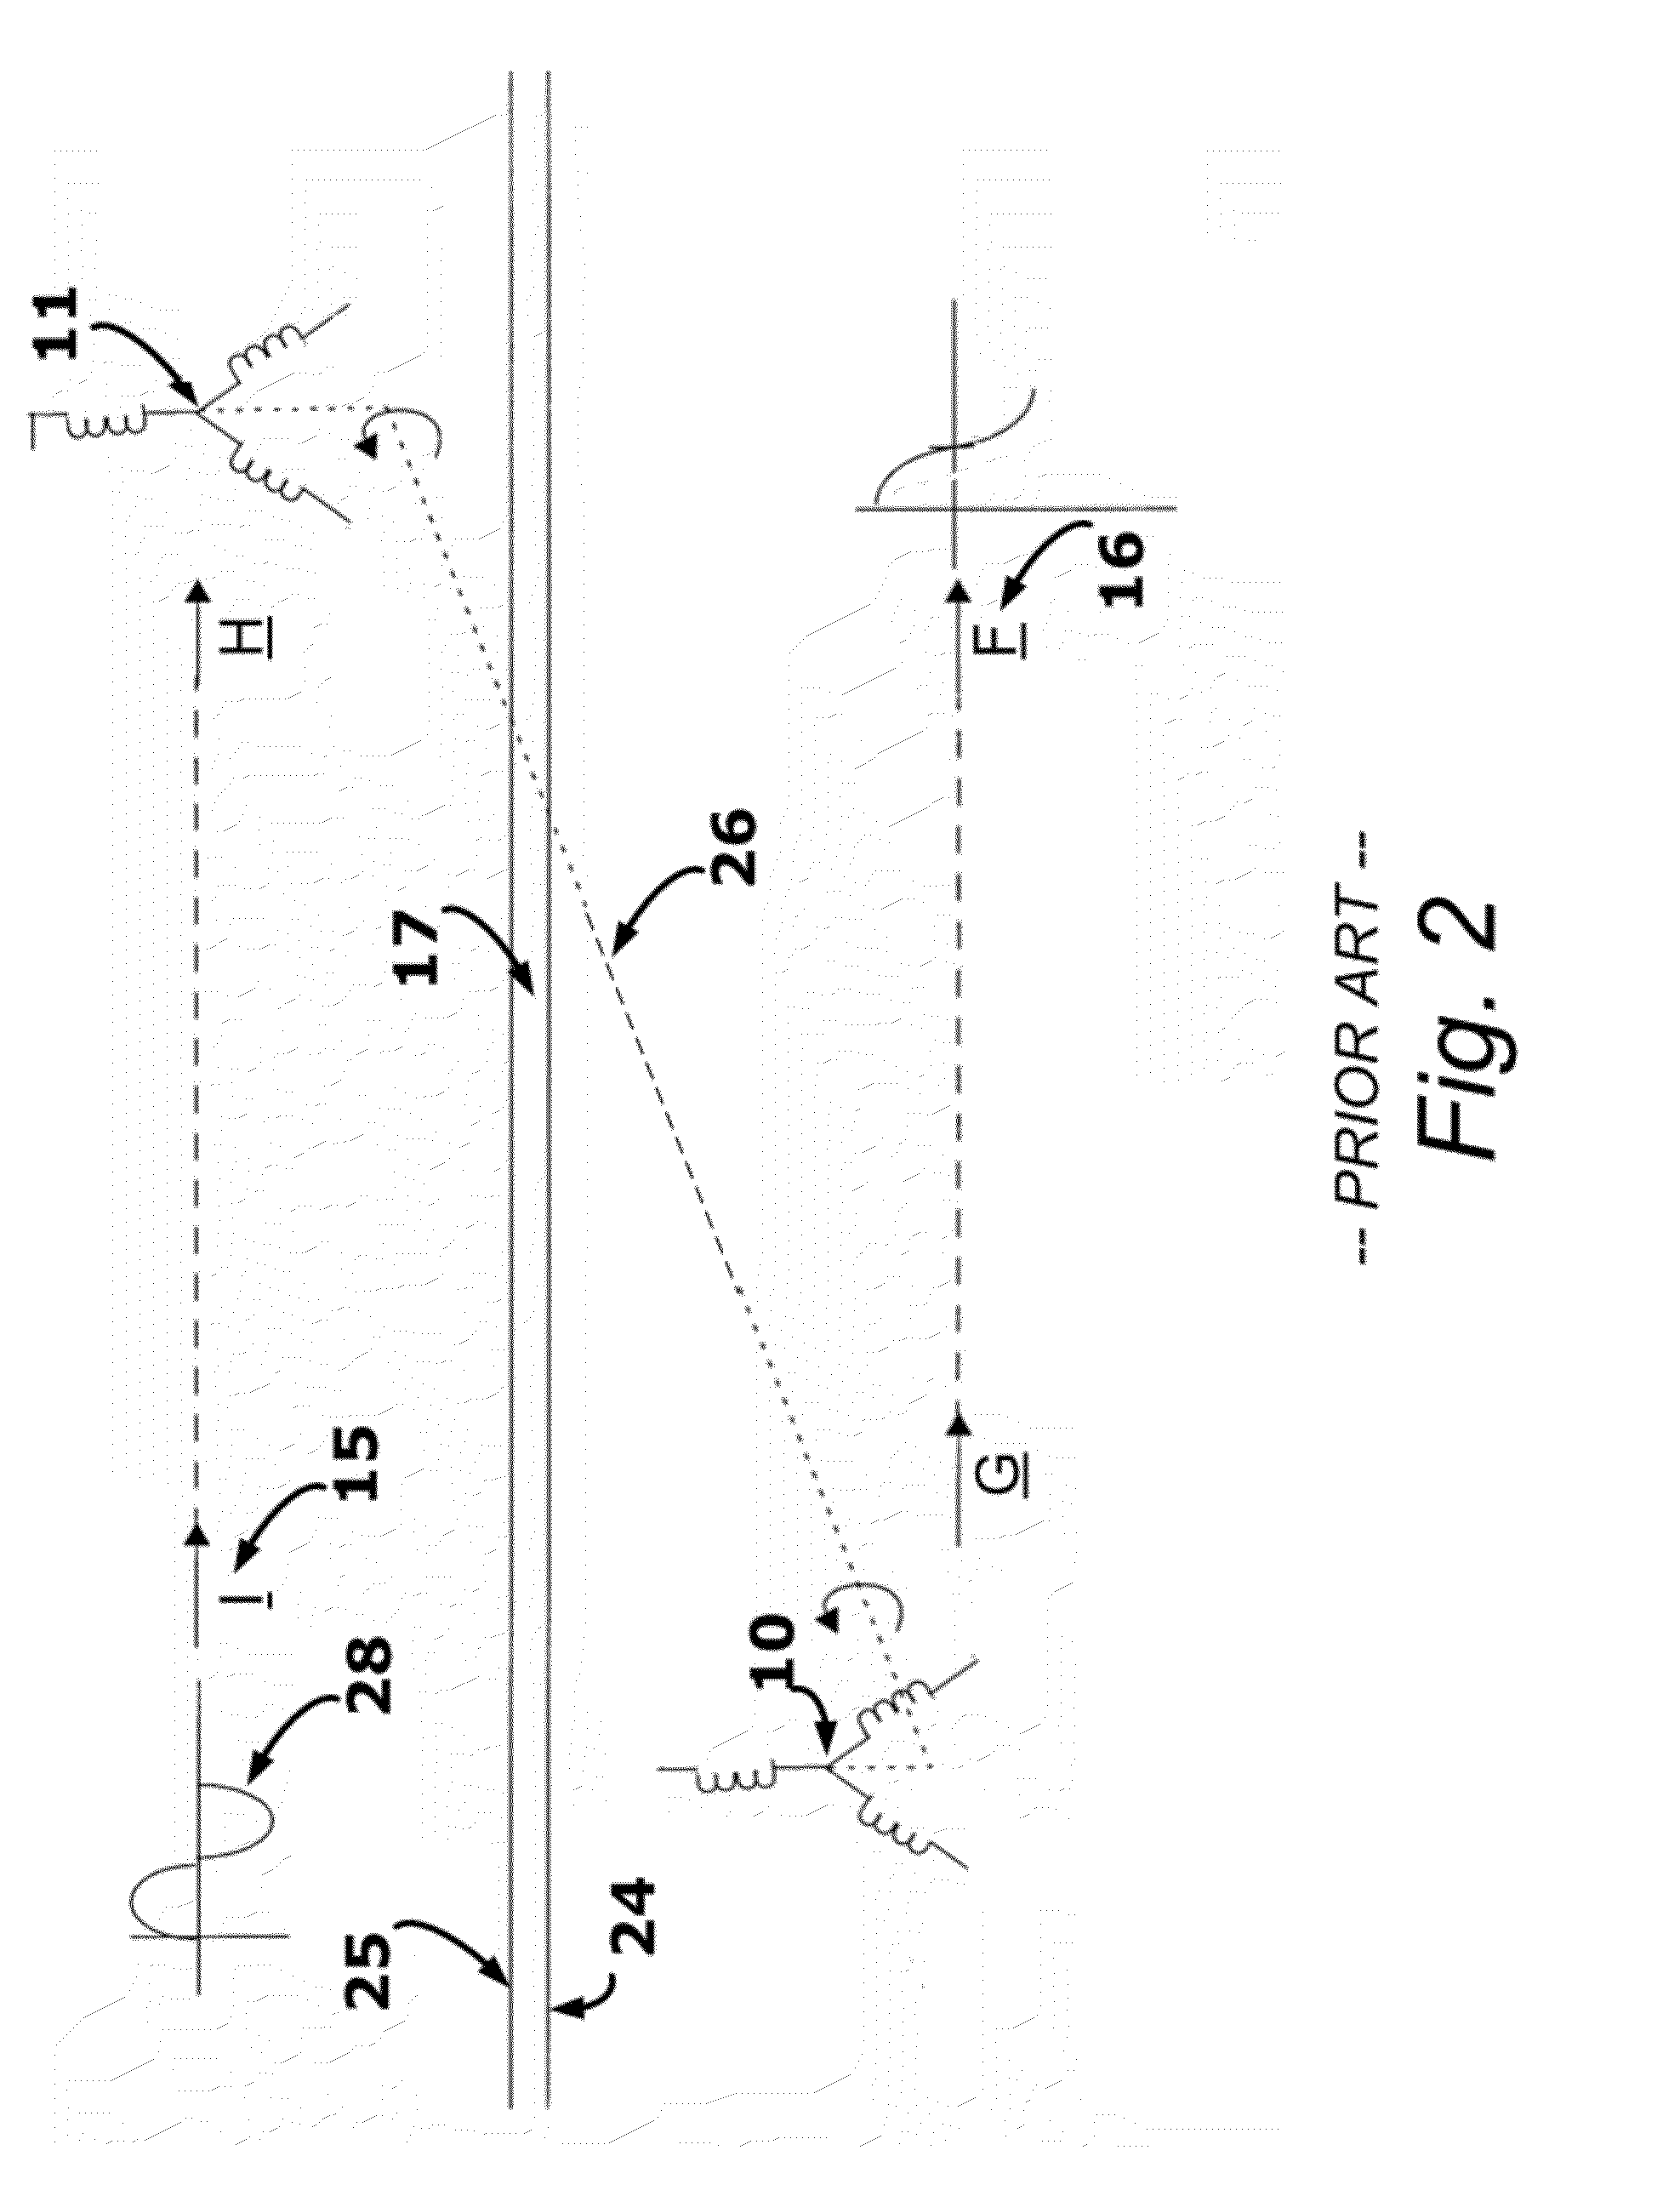 Brushless multiphase self-commutation control (or BMSCC) And Related Inventions